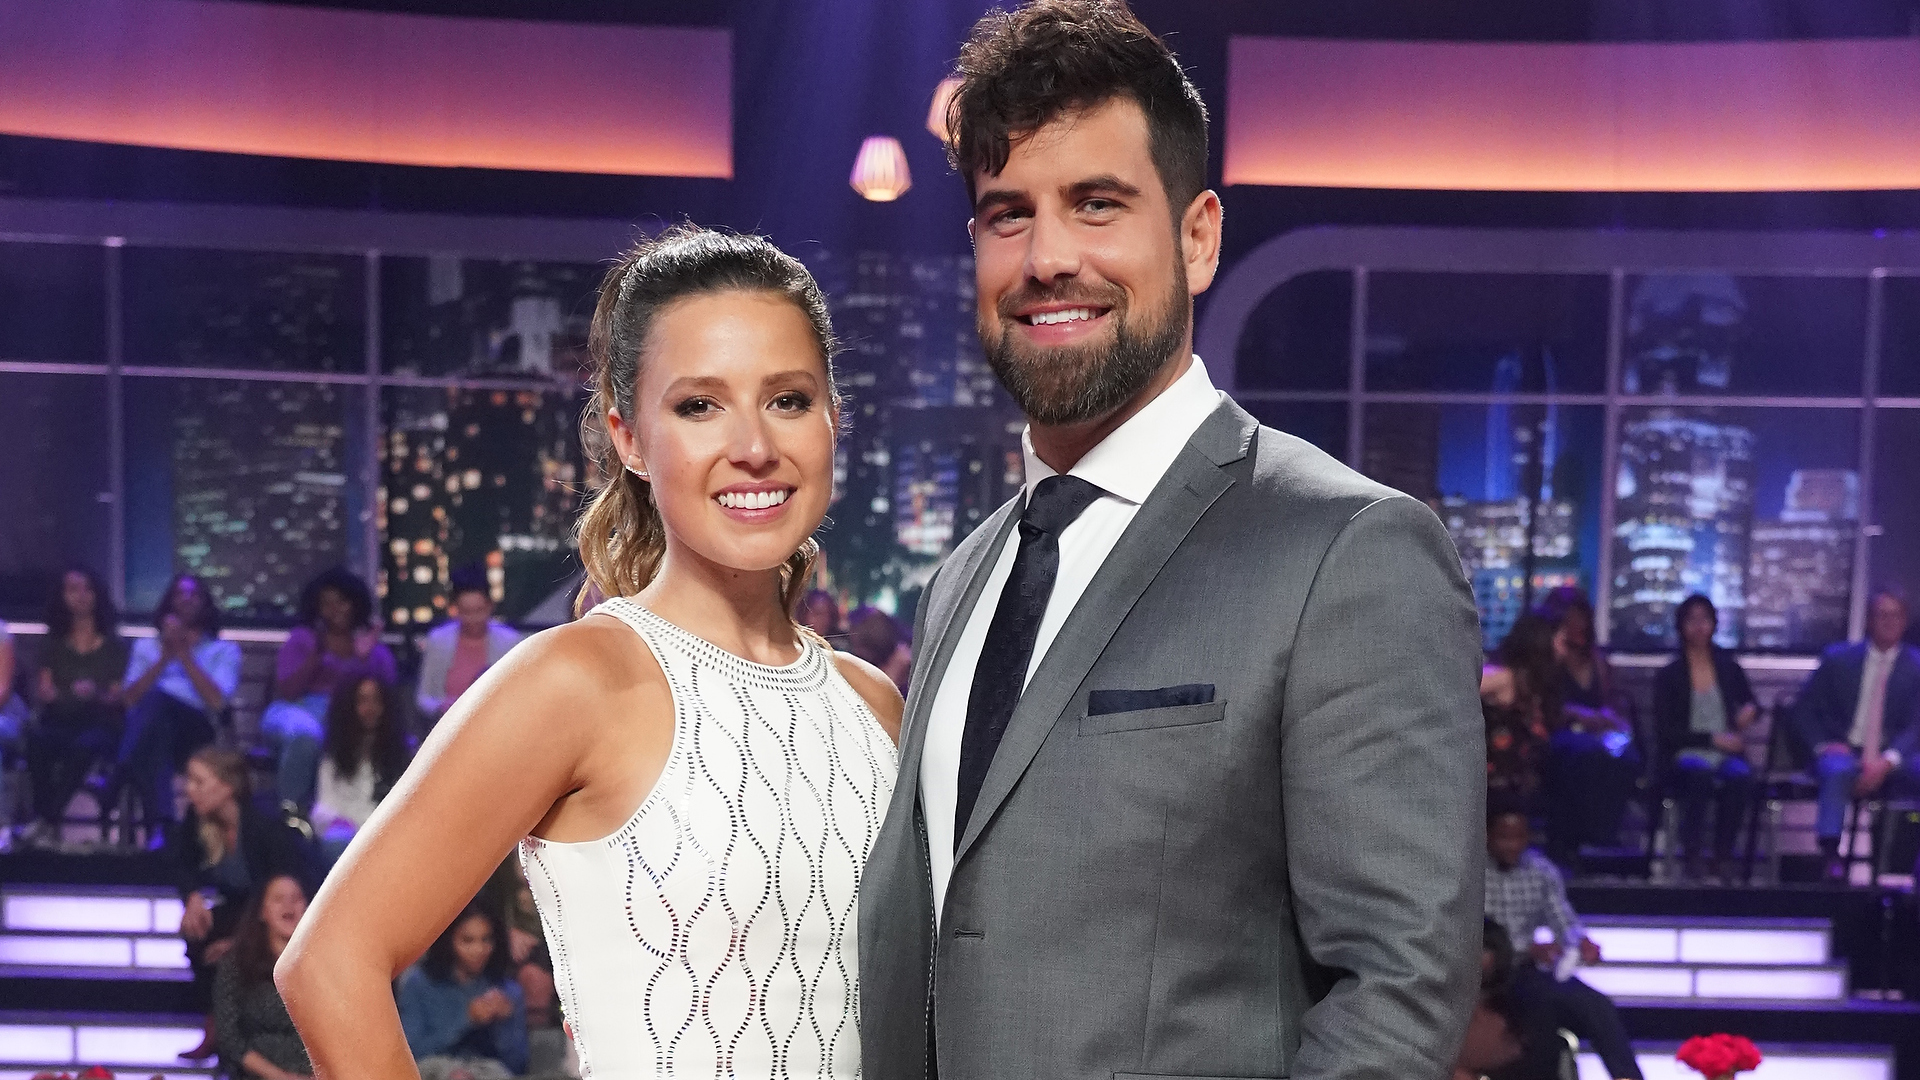 Katie Thurston and Blake Moynes tell Bachelor Nation they are still together after getting engaged in ‘The Bachelorette’ Season 17 finale in 2021